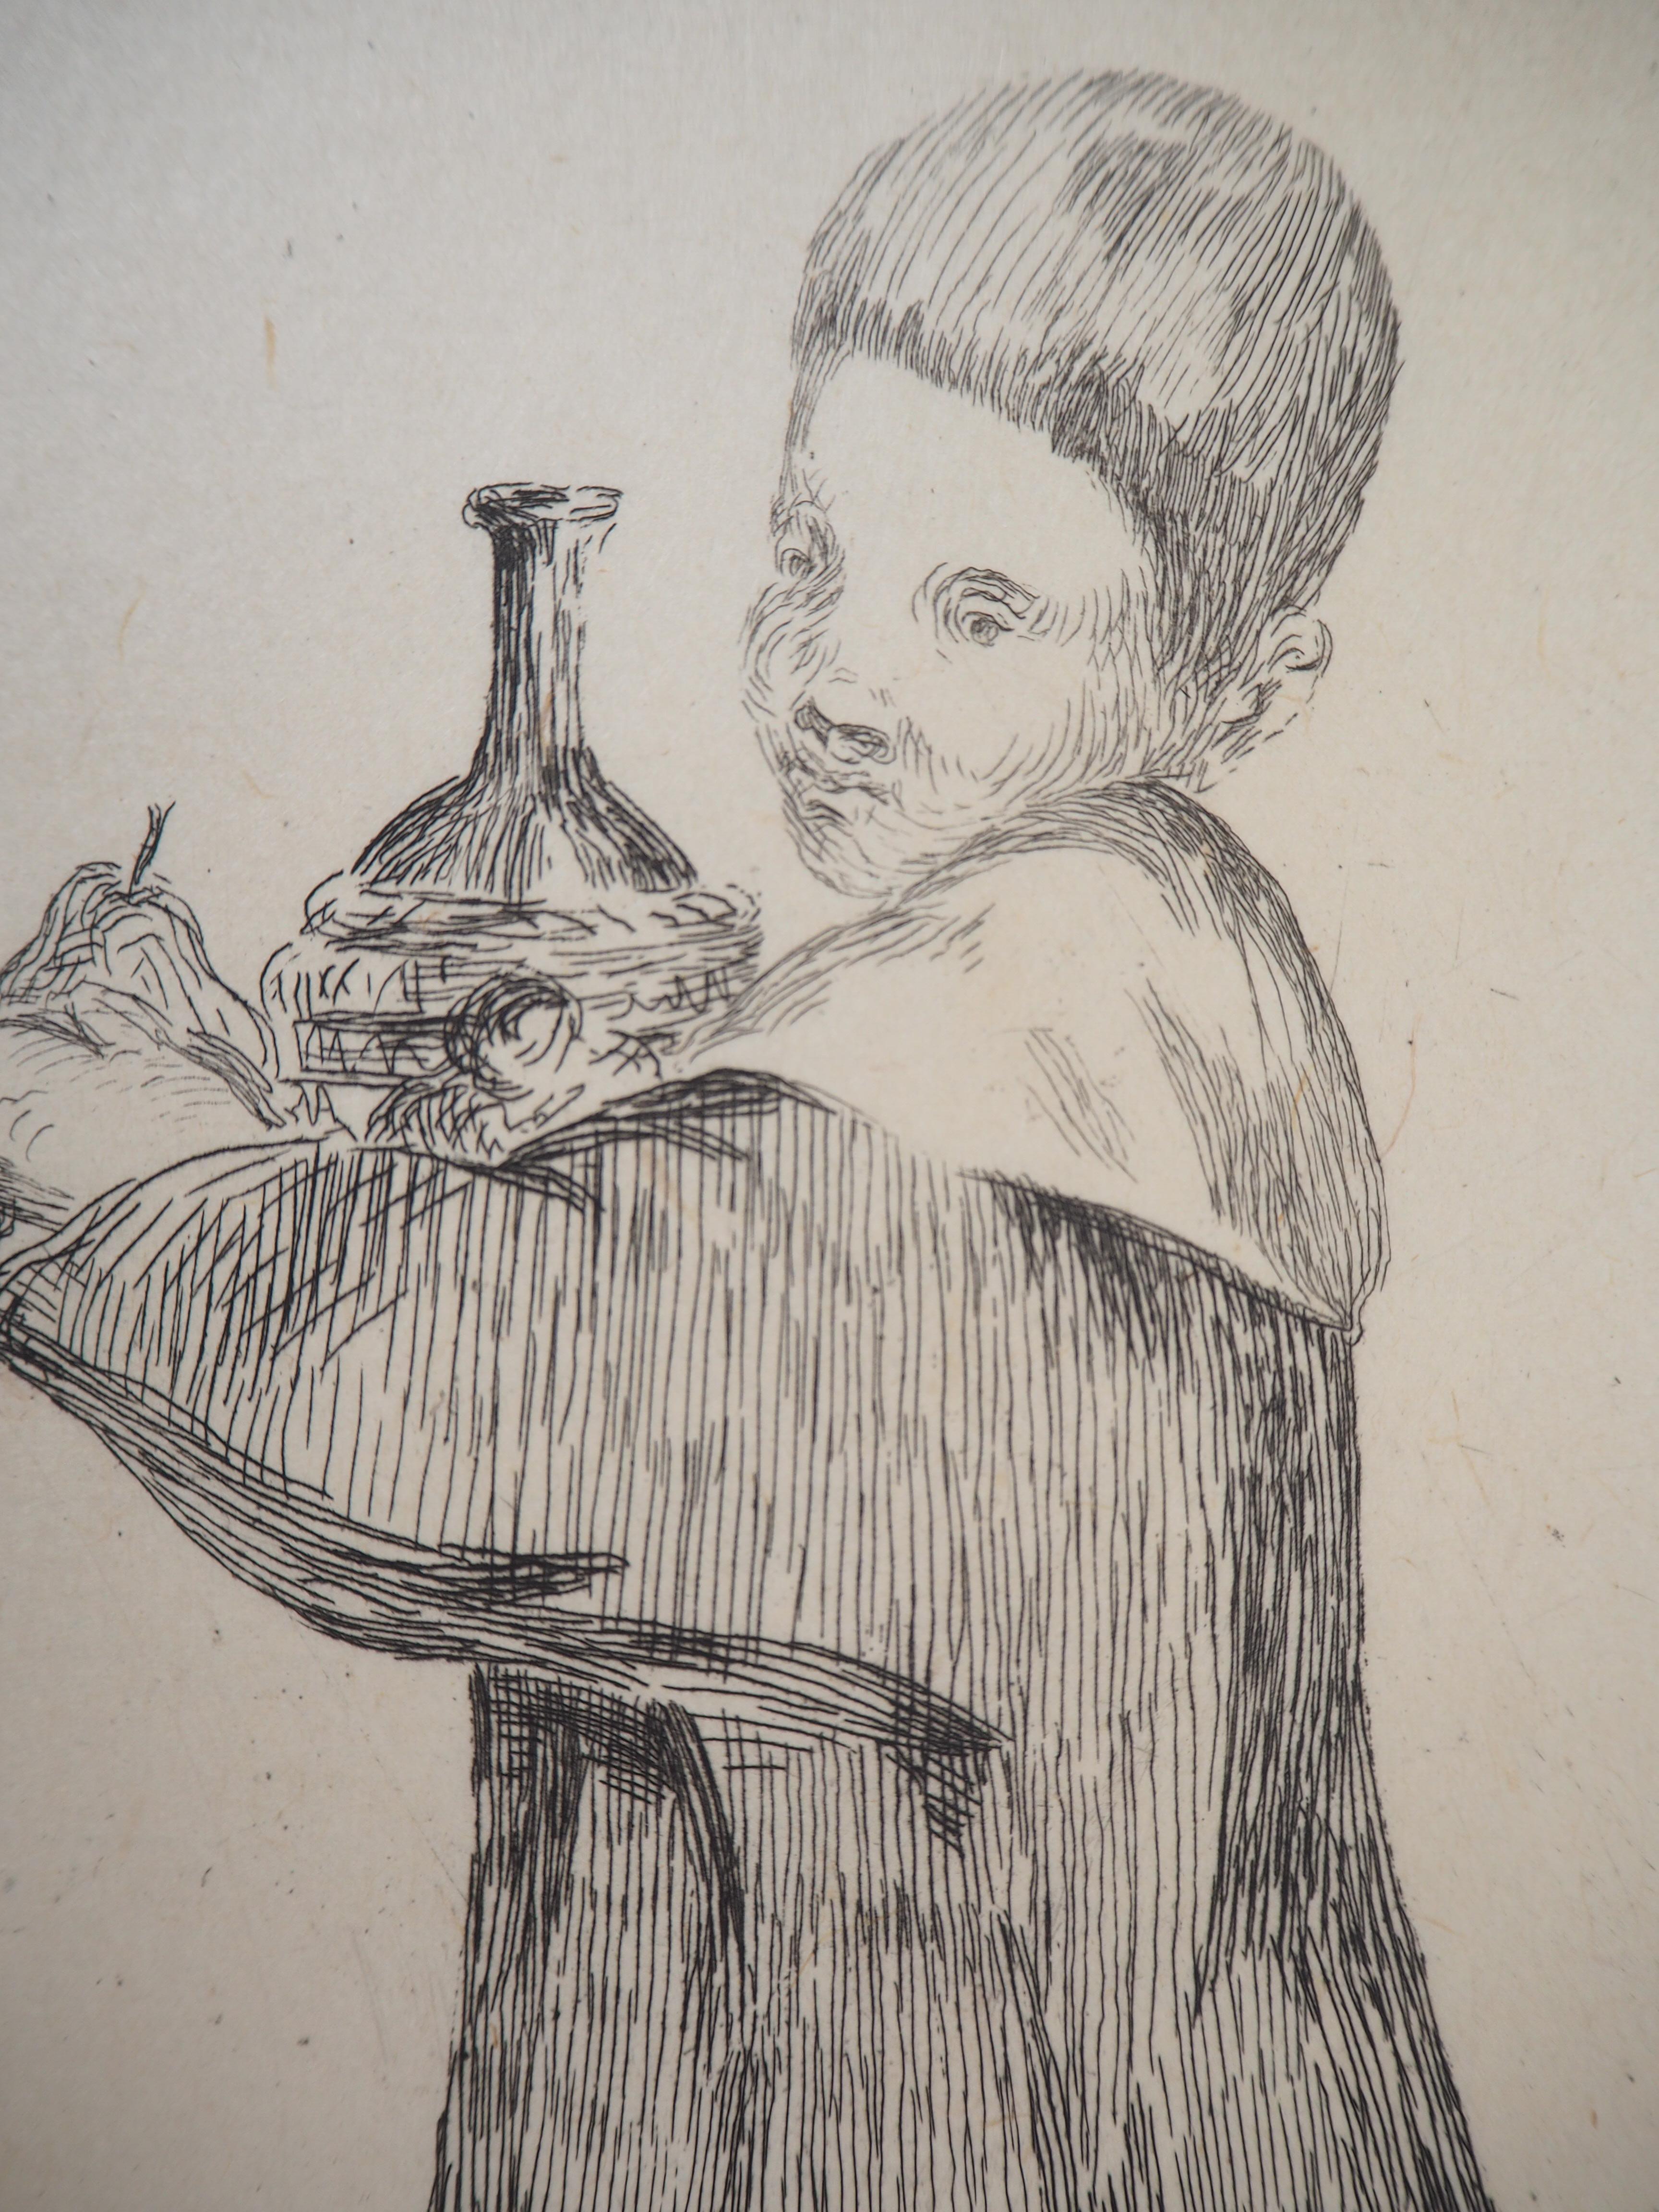 Edouard MANET
Child with a Tray (Pear and Bottle), 1861

Original etching
Printed signature in the plate
On Japan paper 36 x 24 cm (c. 12 x 10 inch)

REFERENCES : Catalog raisonnes Guerin n°15

Excellent condition